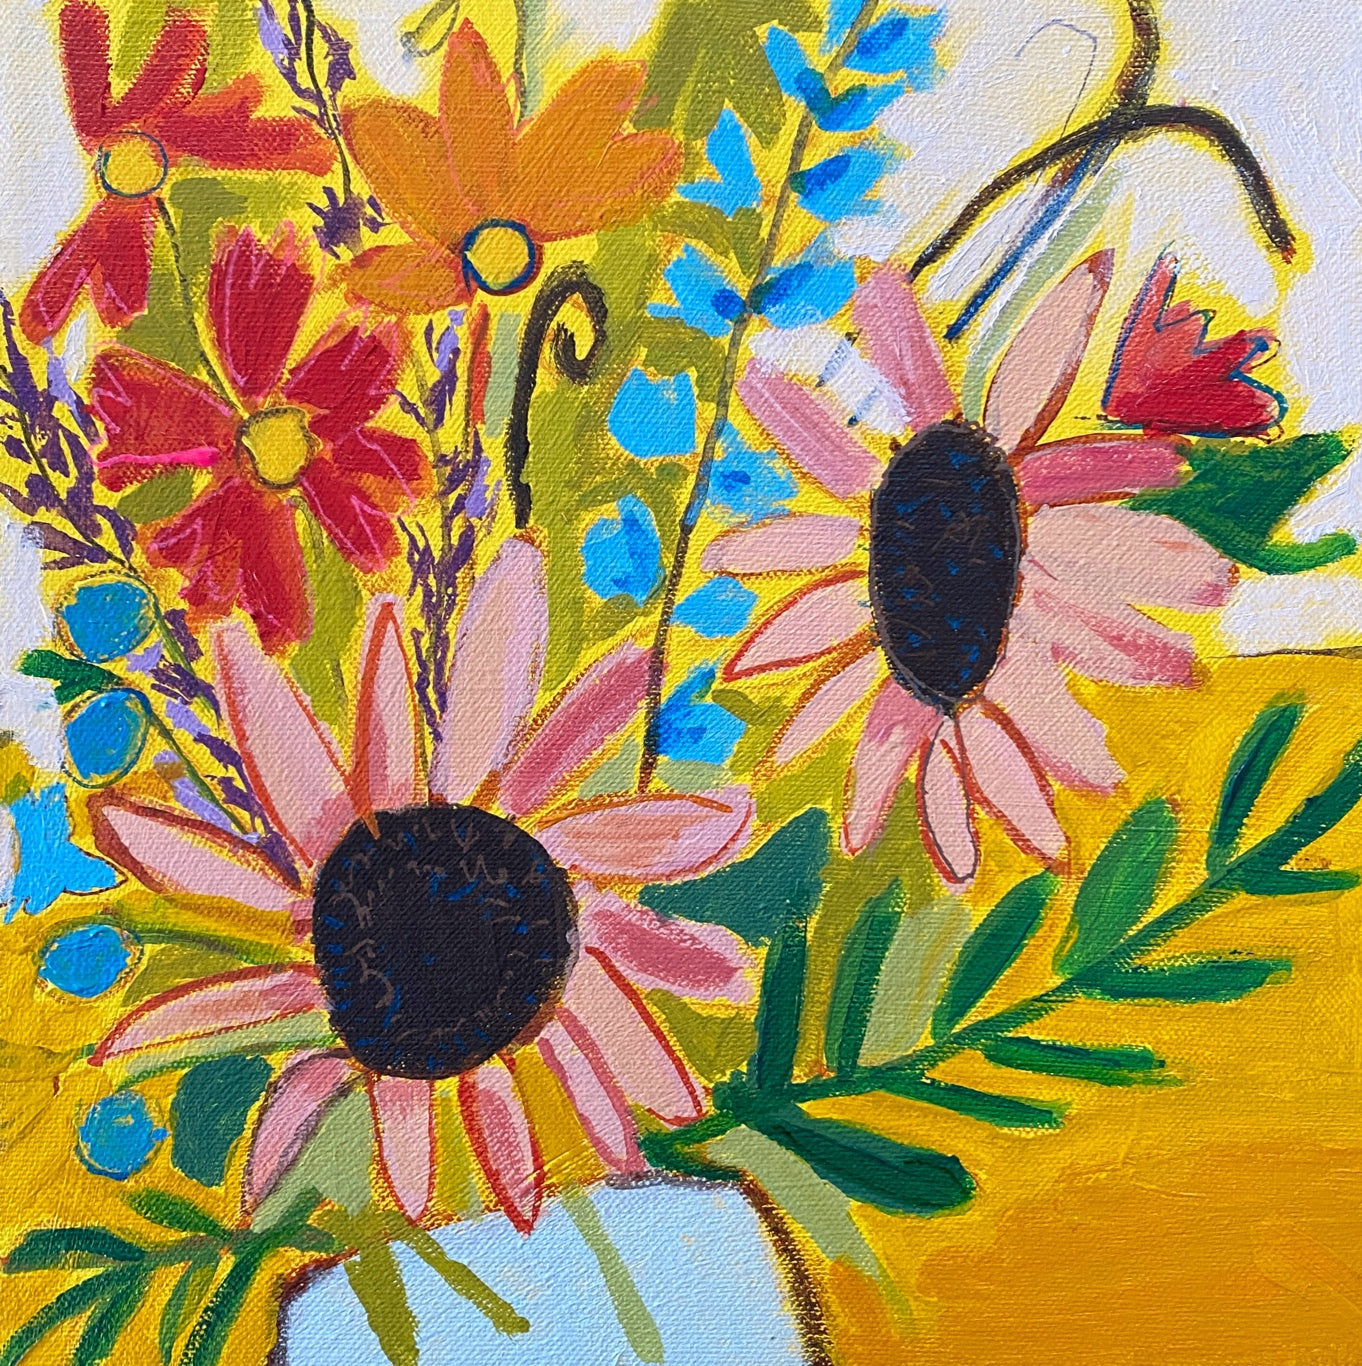 Pink Sunflowers / Original Mixed Media Floral On Canvas / Red / Orange / Blue / Yellow / White